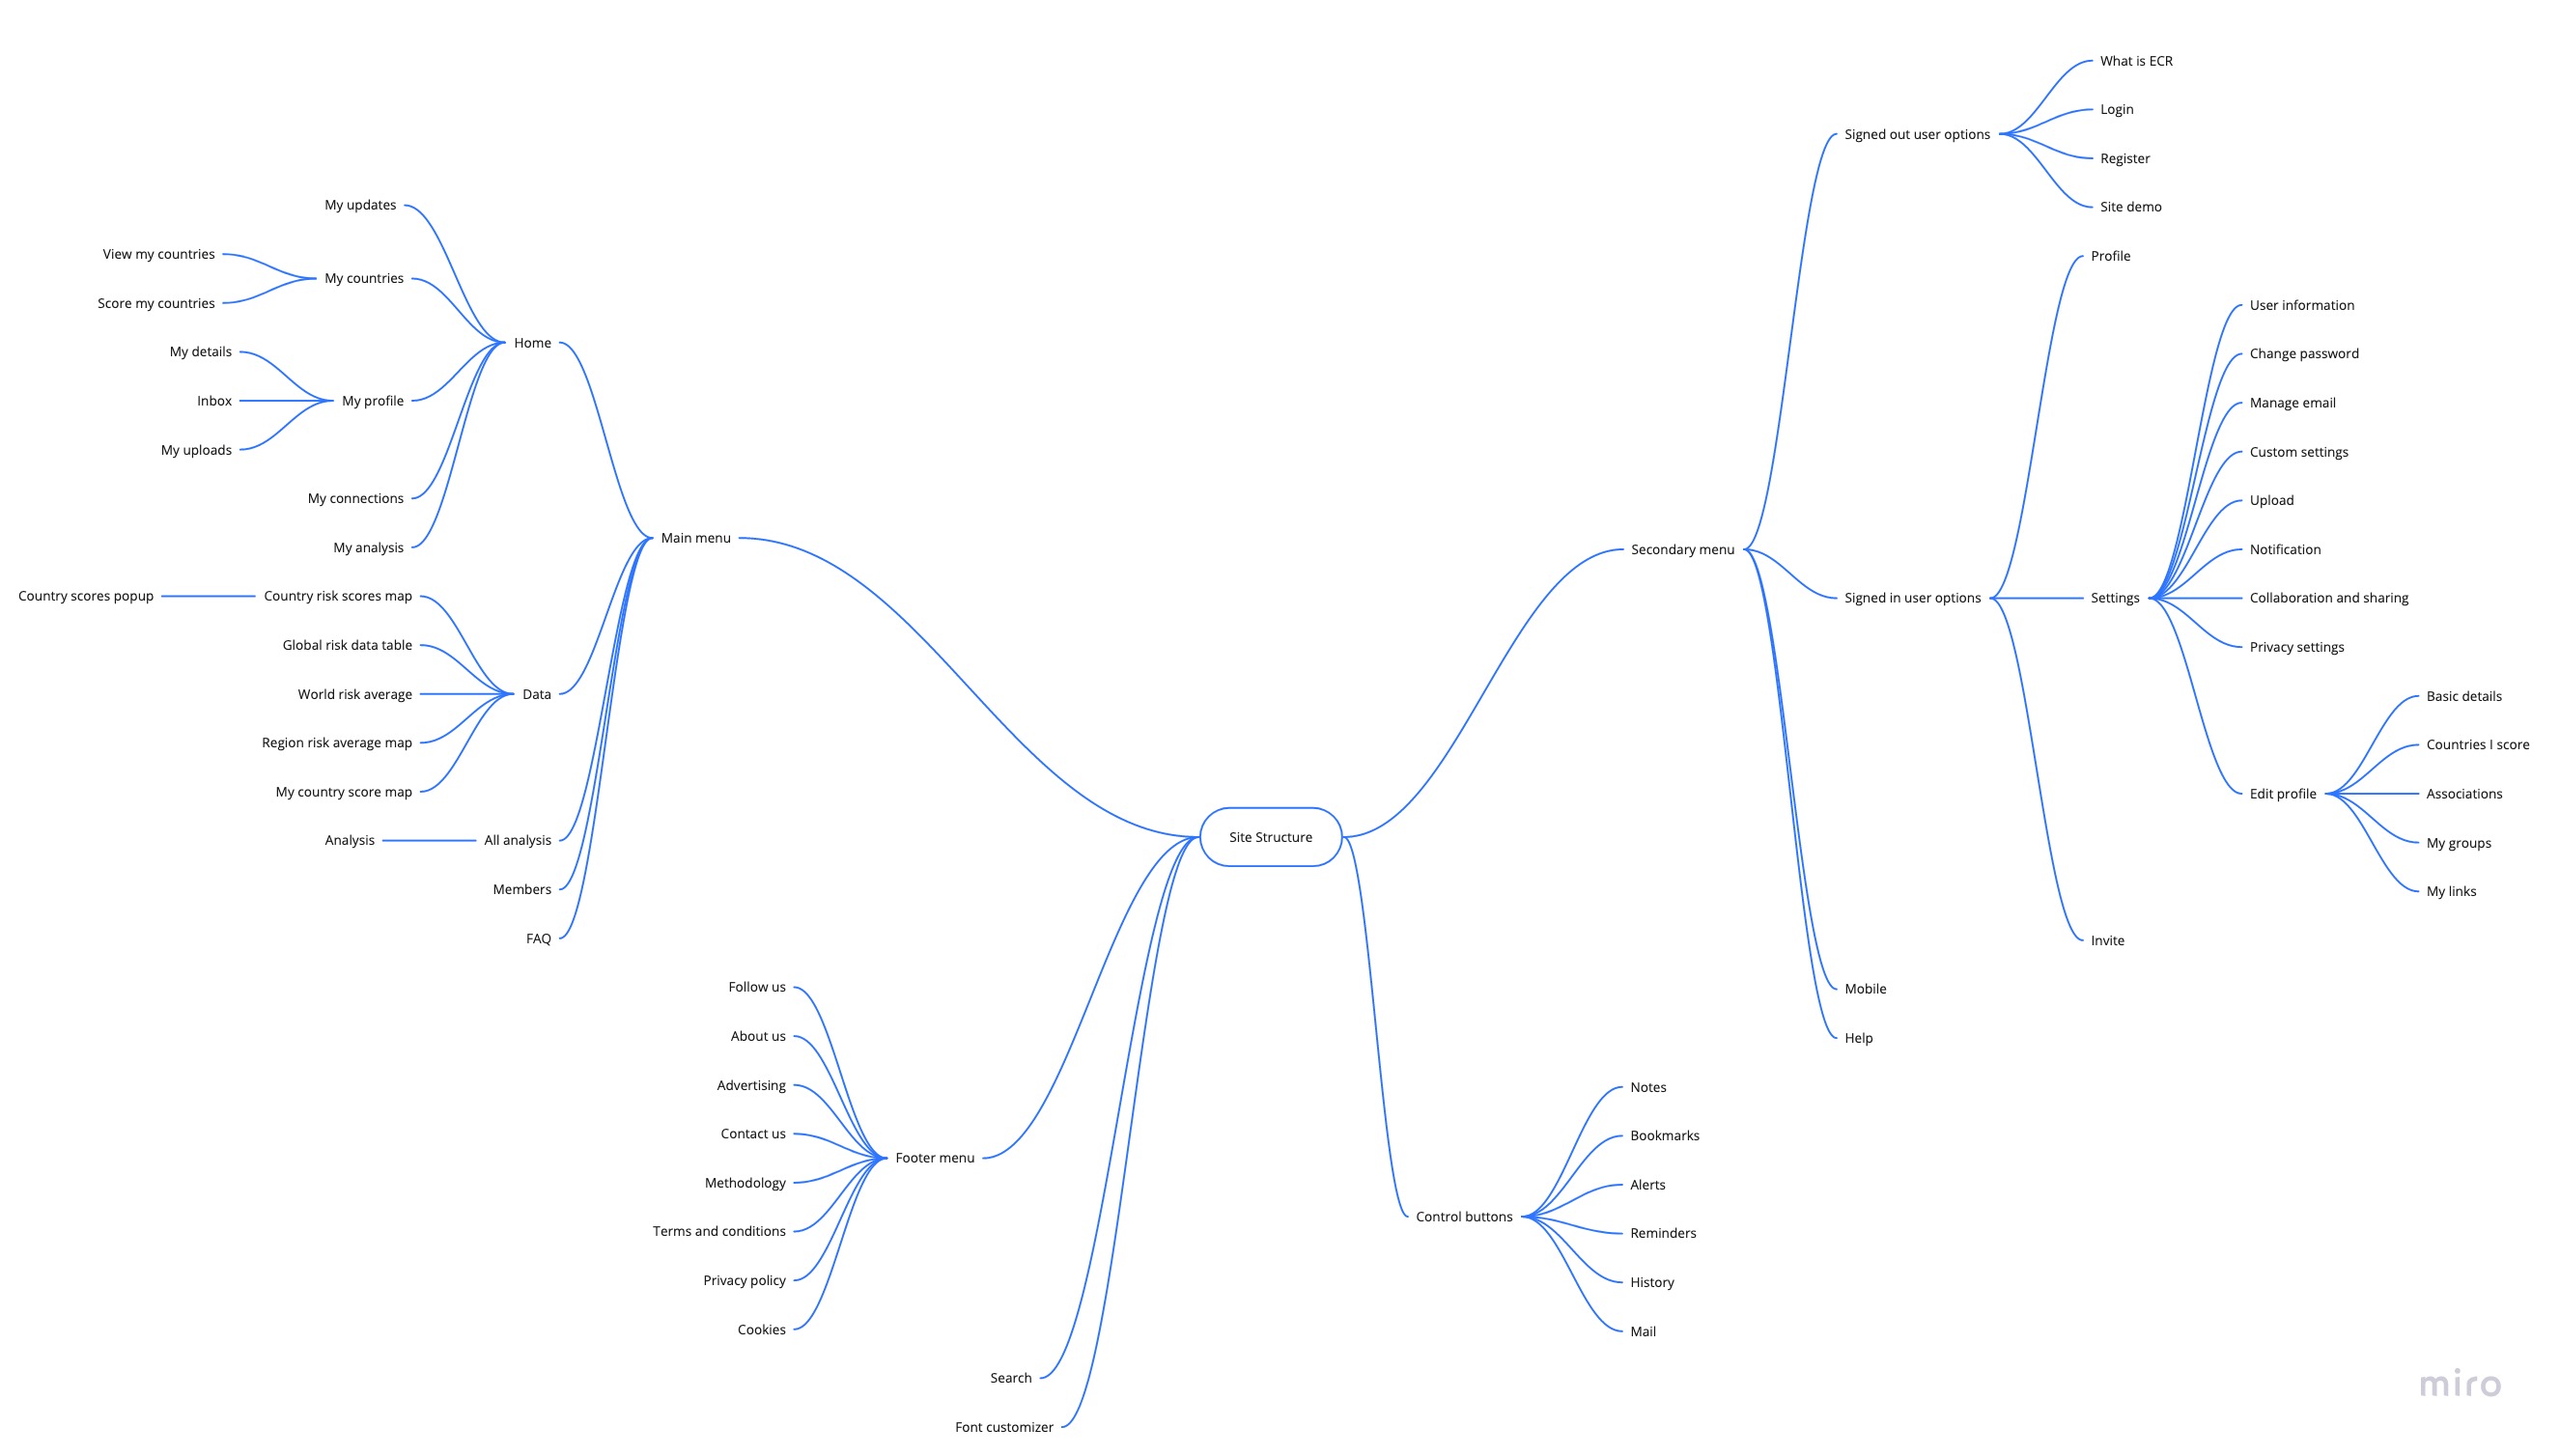 Mind map of the website